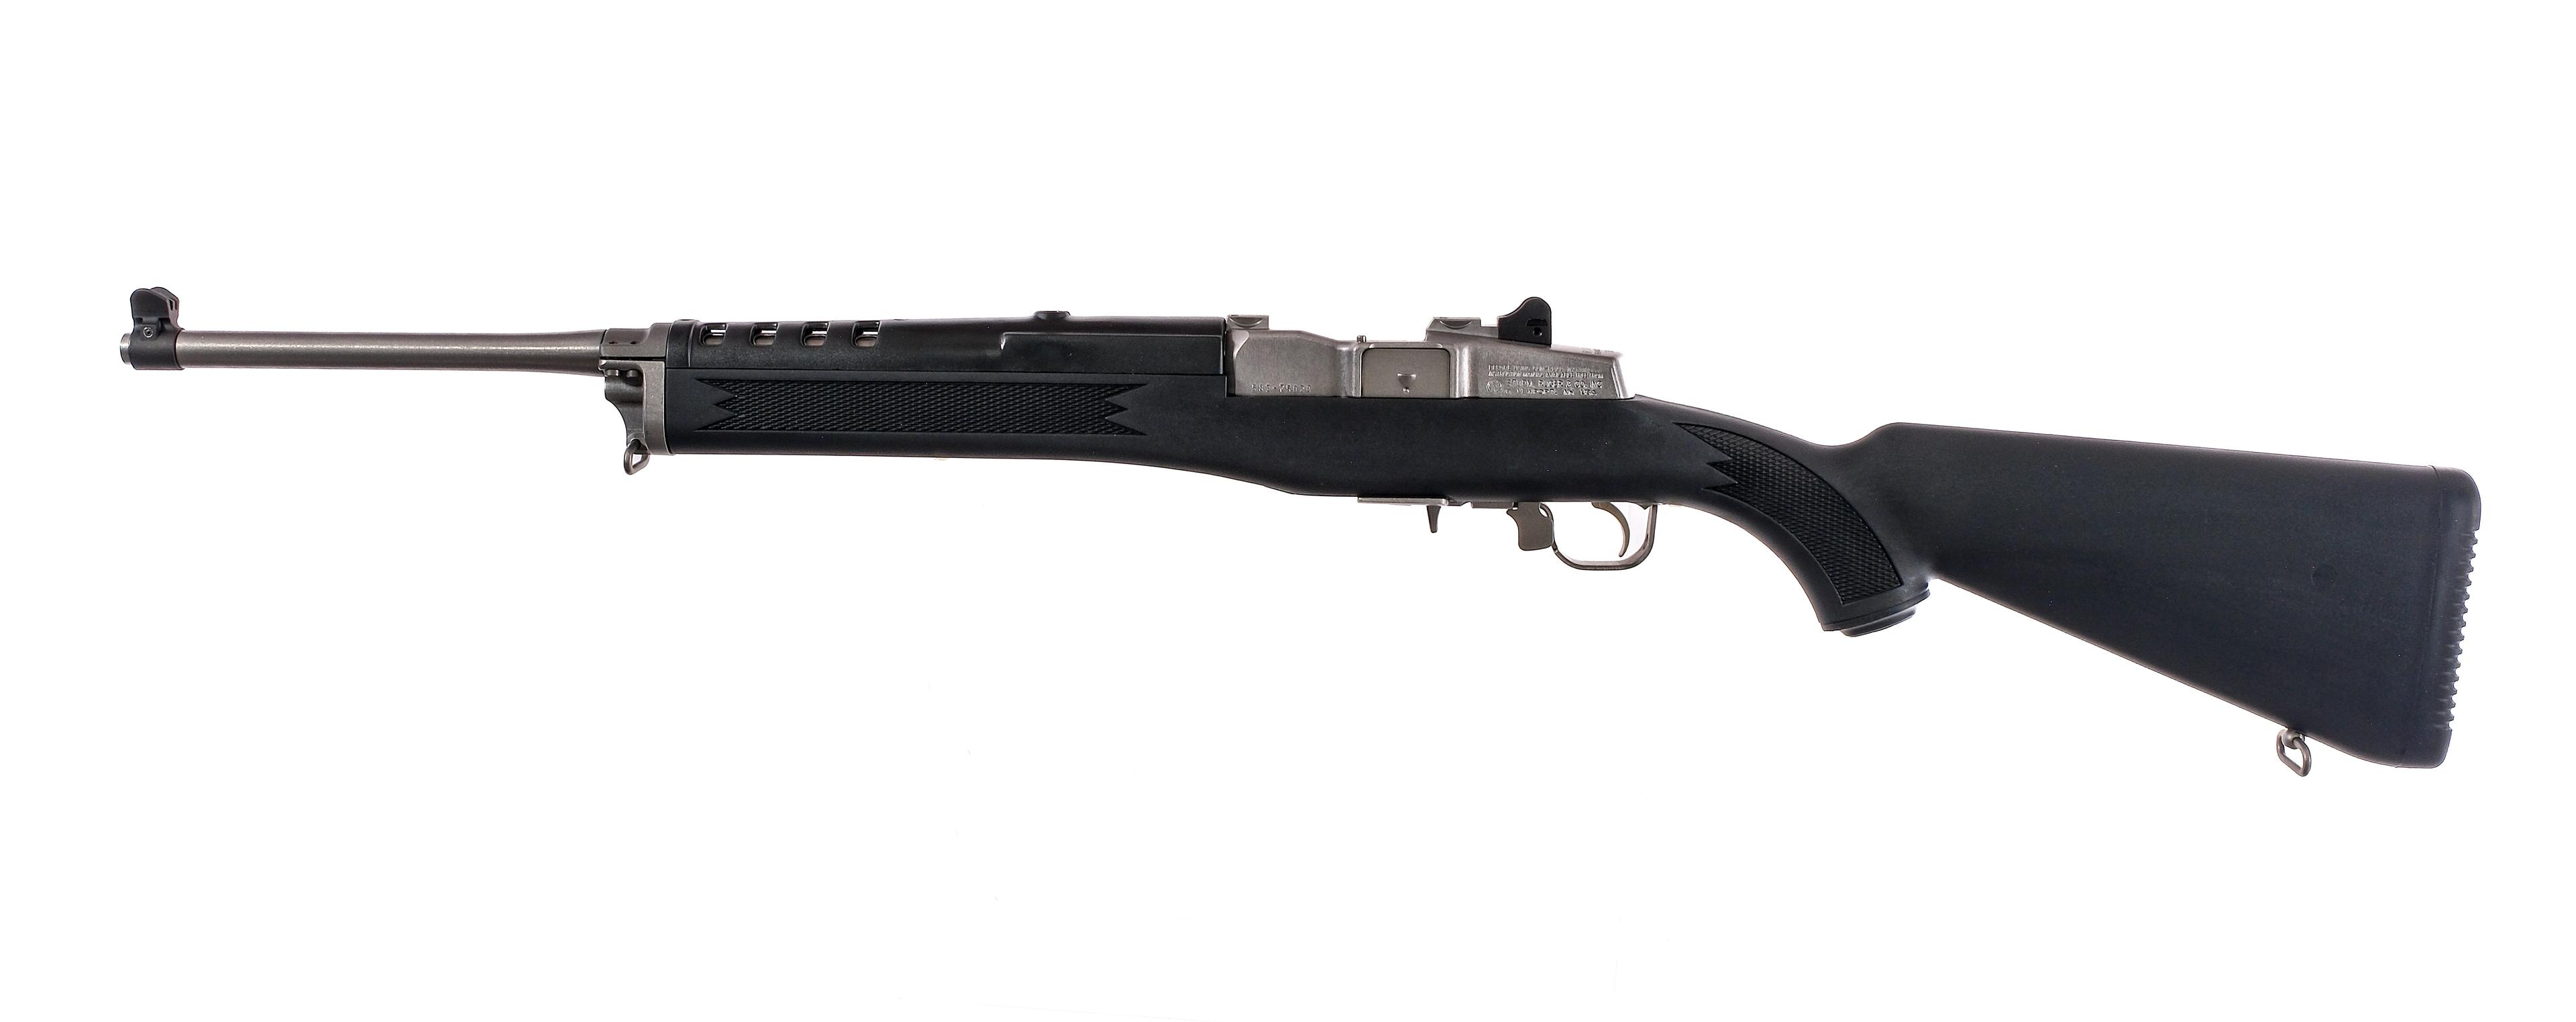 Ruger Mini 30 Ranch Rifle 7.62x39mm Rifle